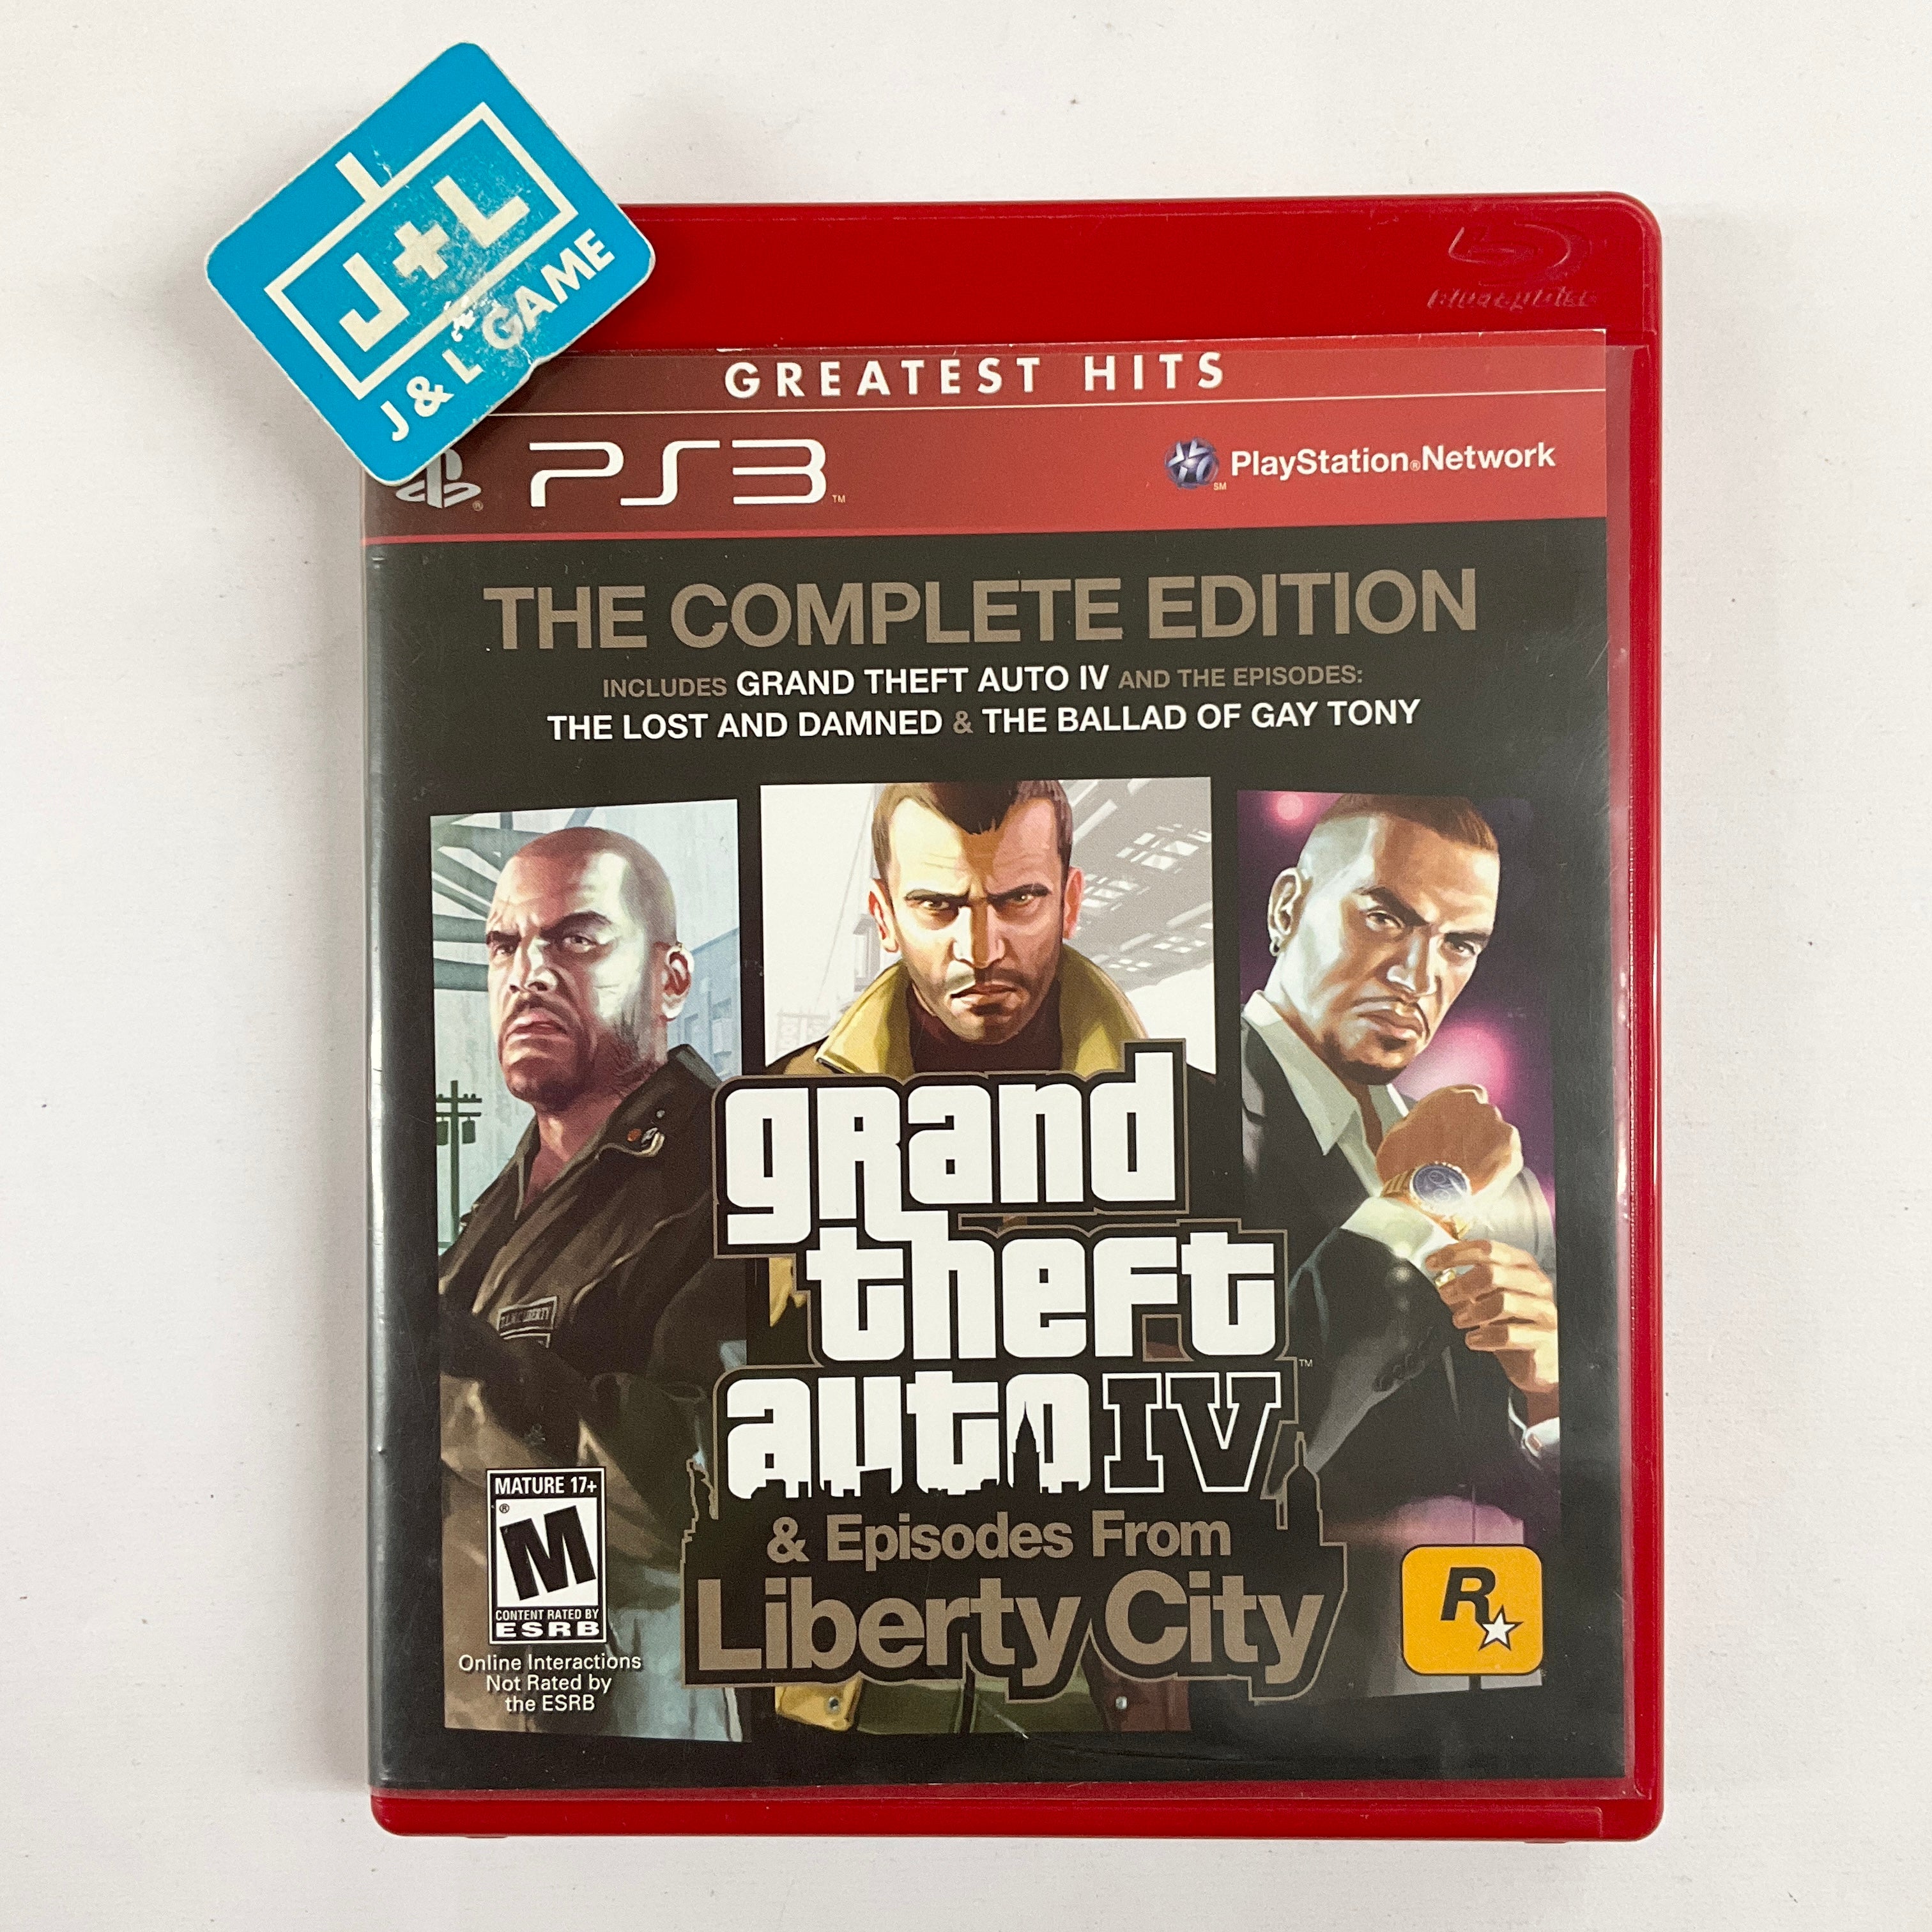 Grand Theft Auto IV & Episodes from Liberty City: The Complete Edition (Greatest Hits) - (PS3) PlayStation 3 [Pre-Owned] Video Games Rockstar Games   